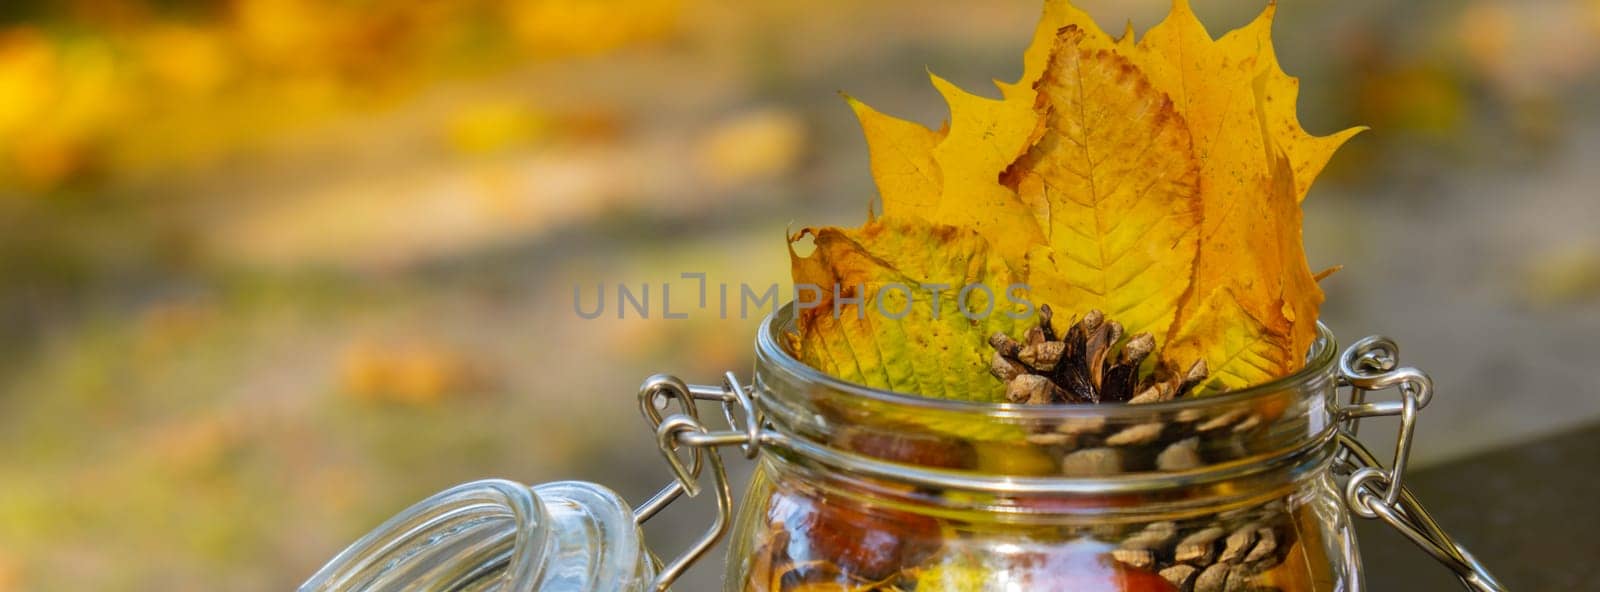 Glass jar with autumn leaves in a forest glade. Colorful autumn set of bright yellow red green orange leaves, big pine cones, brown chestnuts and glass jar. Seasonal decoration, warm natural color combination. Hygge aesthetic fall atmosphere